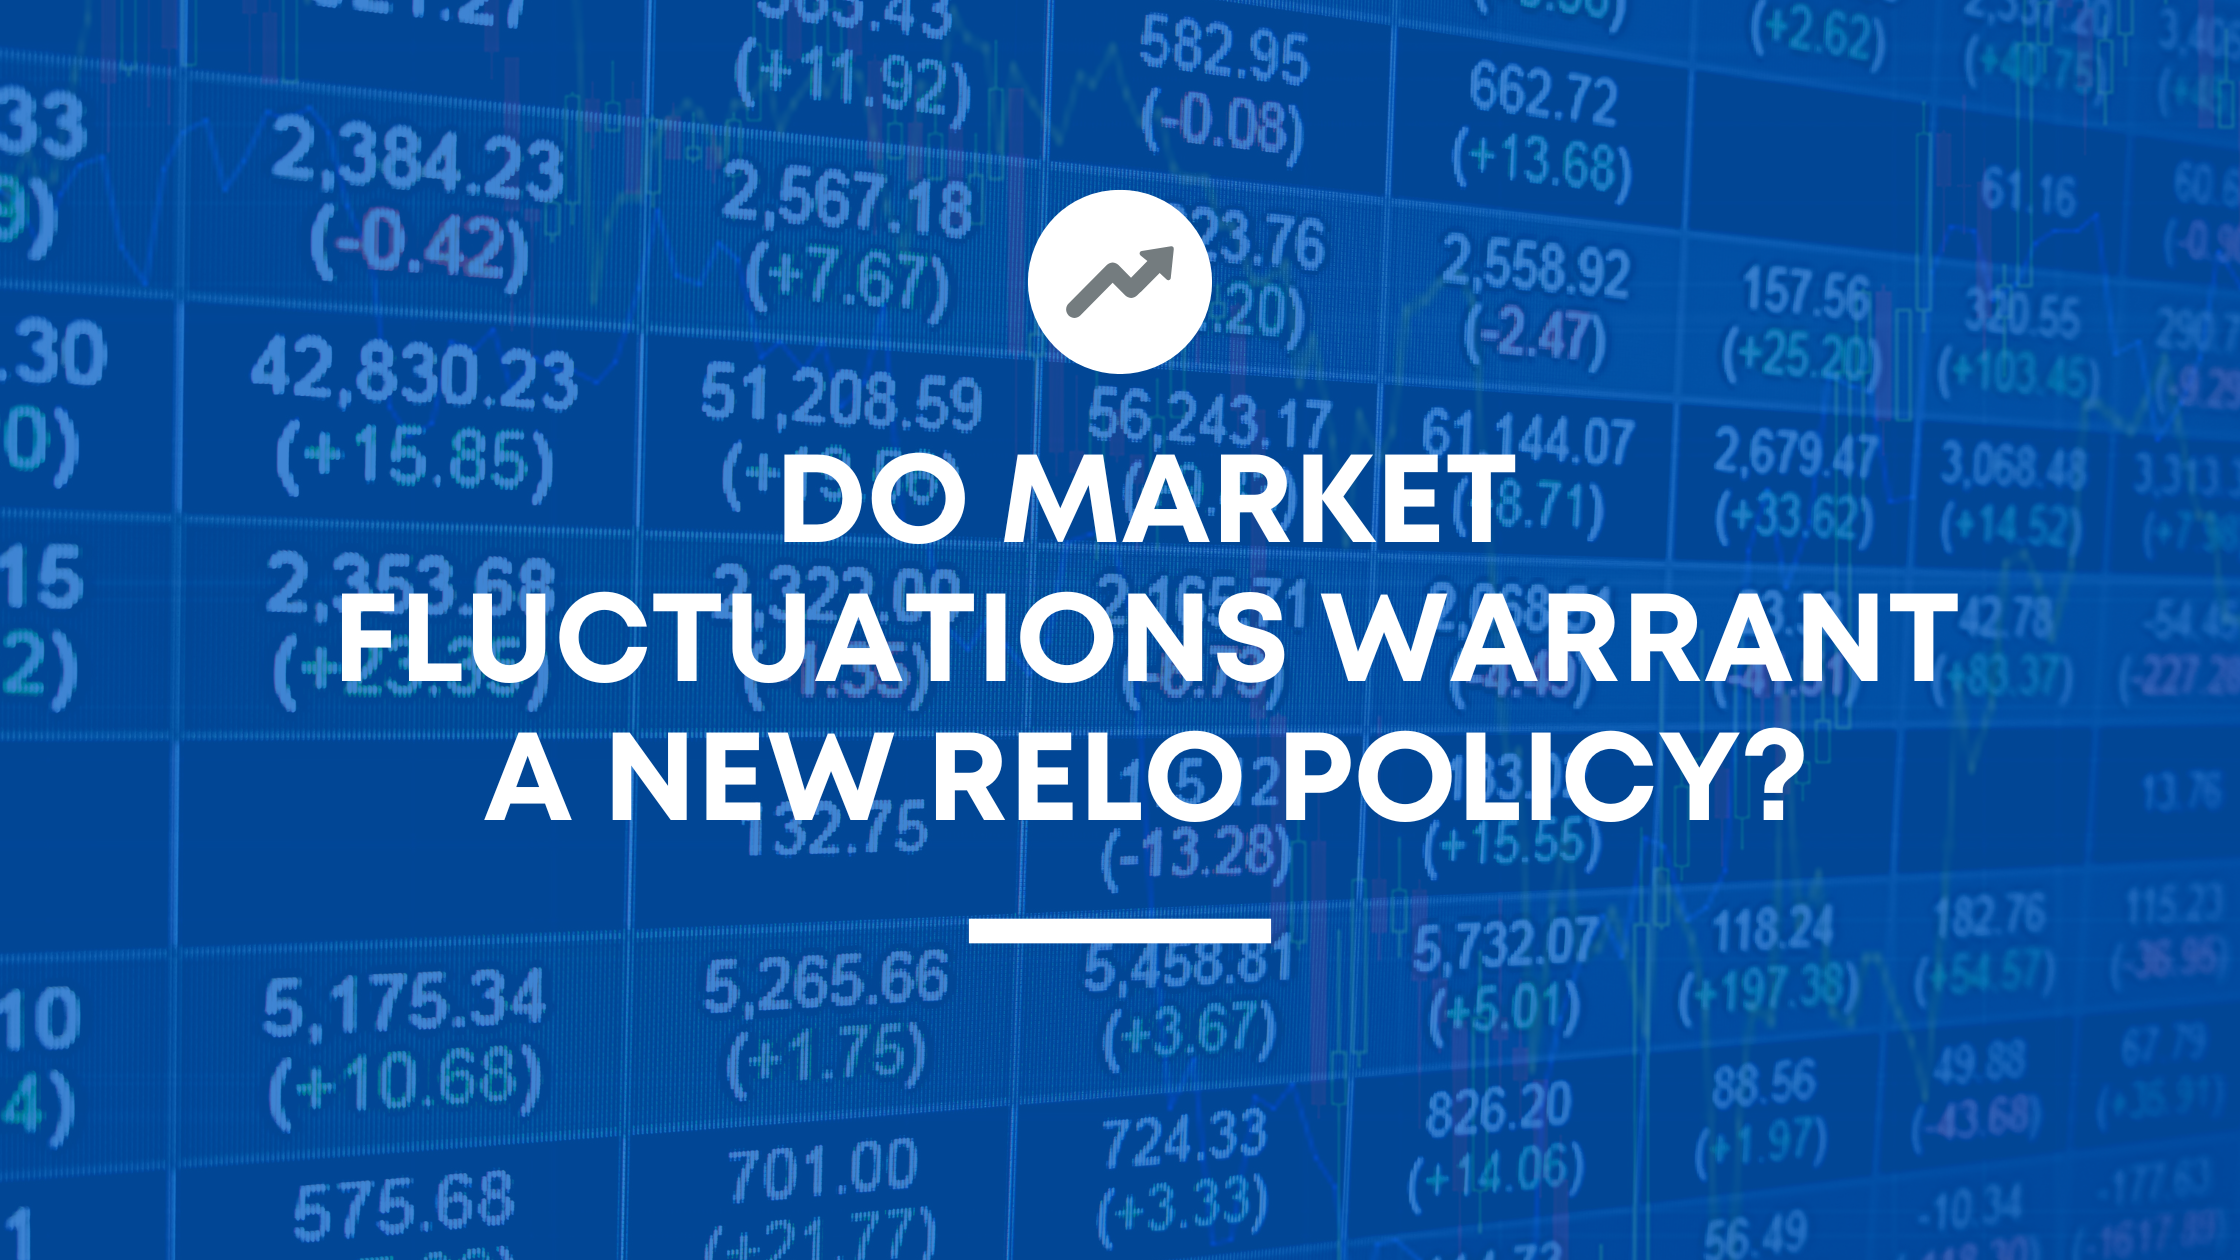 Do market fluctuations warrant a new relo policy?